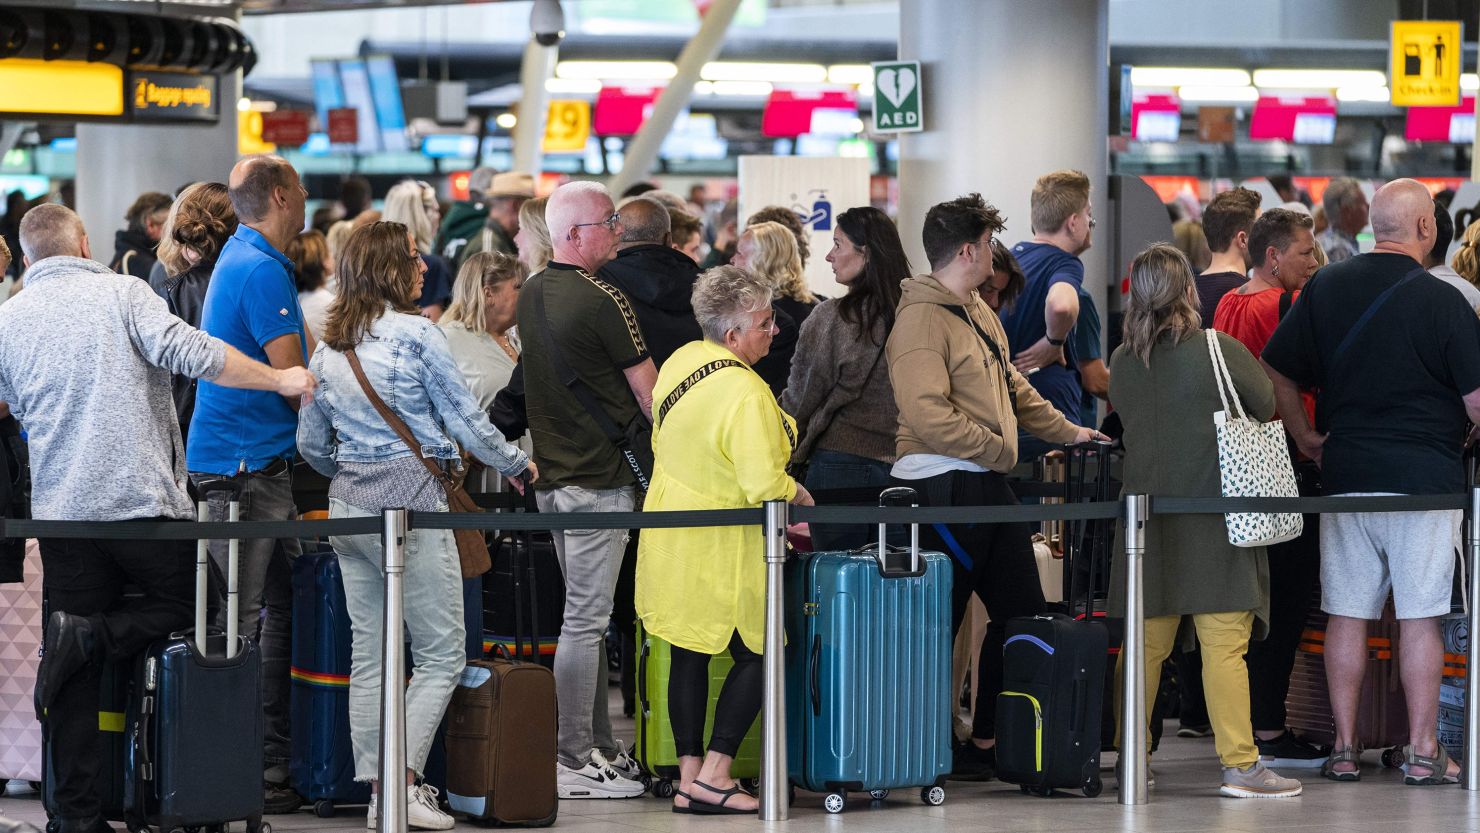 Travellers queue, many going away for the long weekend on Ascension Day, in the departure hall of Schiphol Airport, near Amsterdam on May 26, 2022.